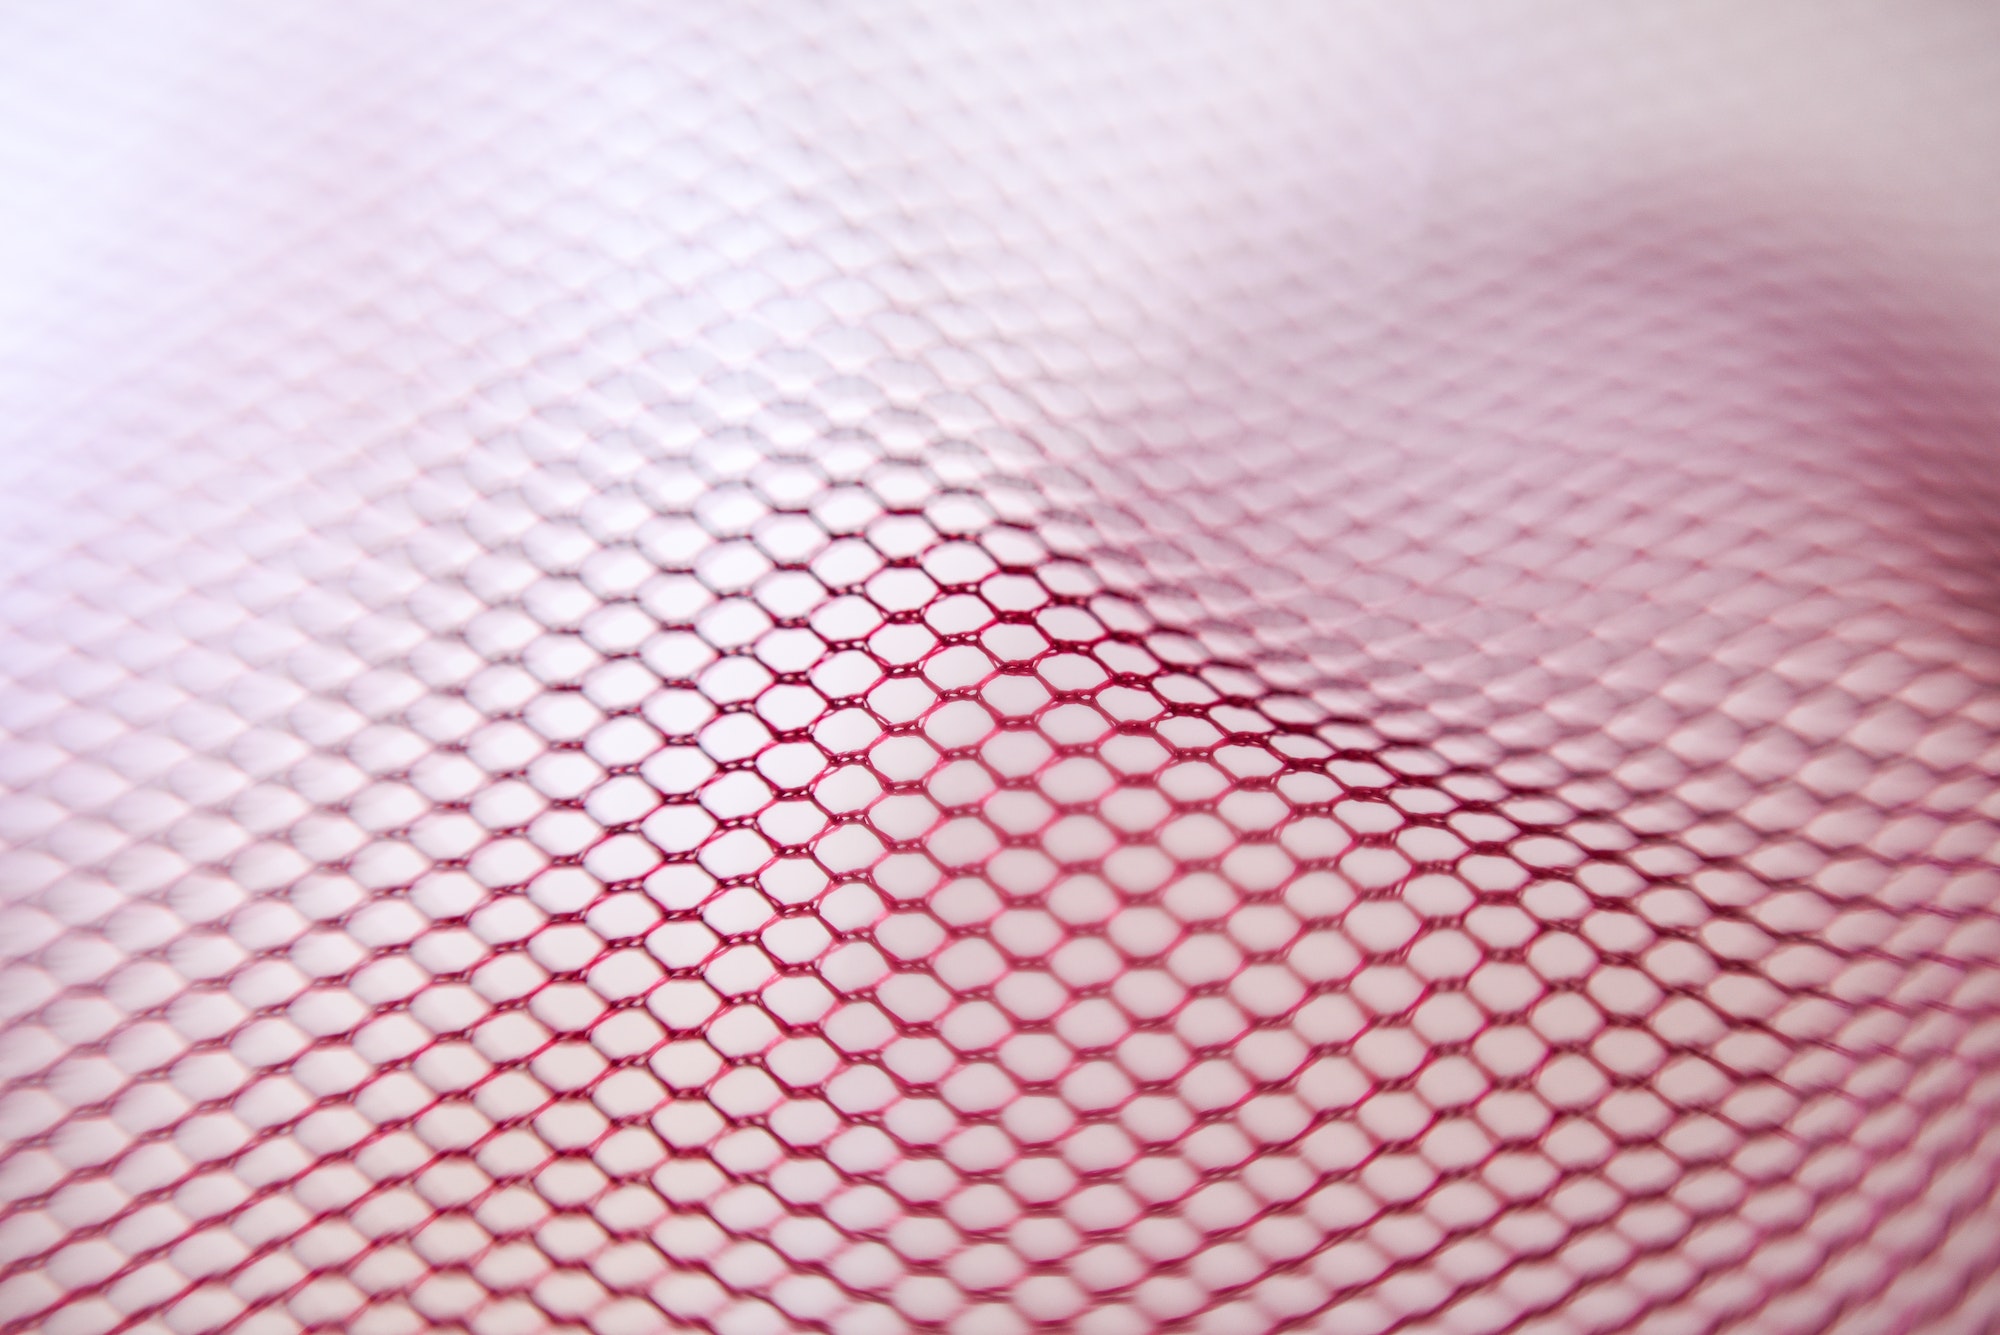 Composite Carbon Fiber Background Woven in red. Free space for text